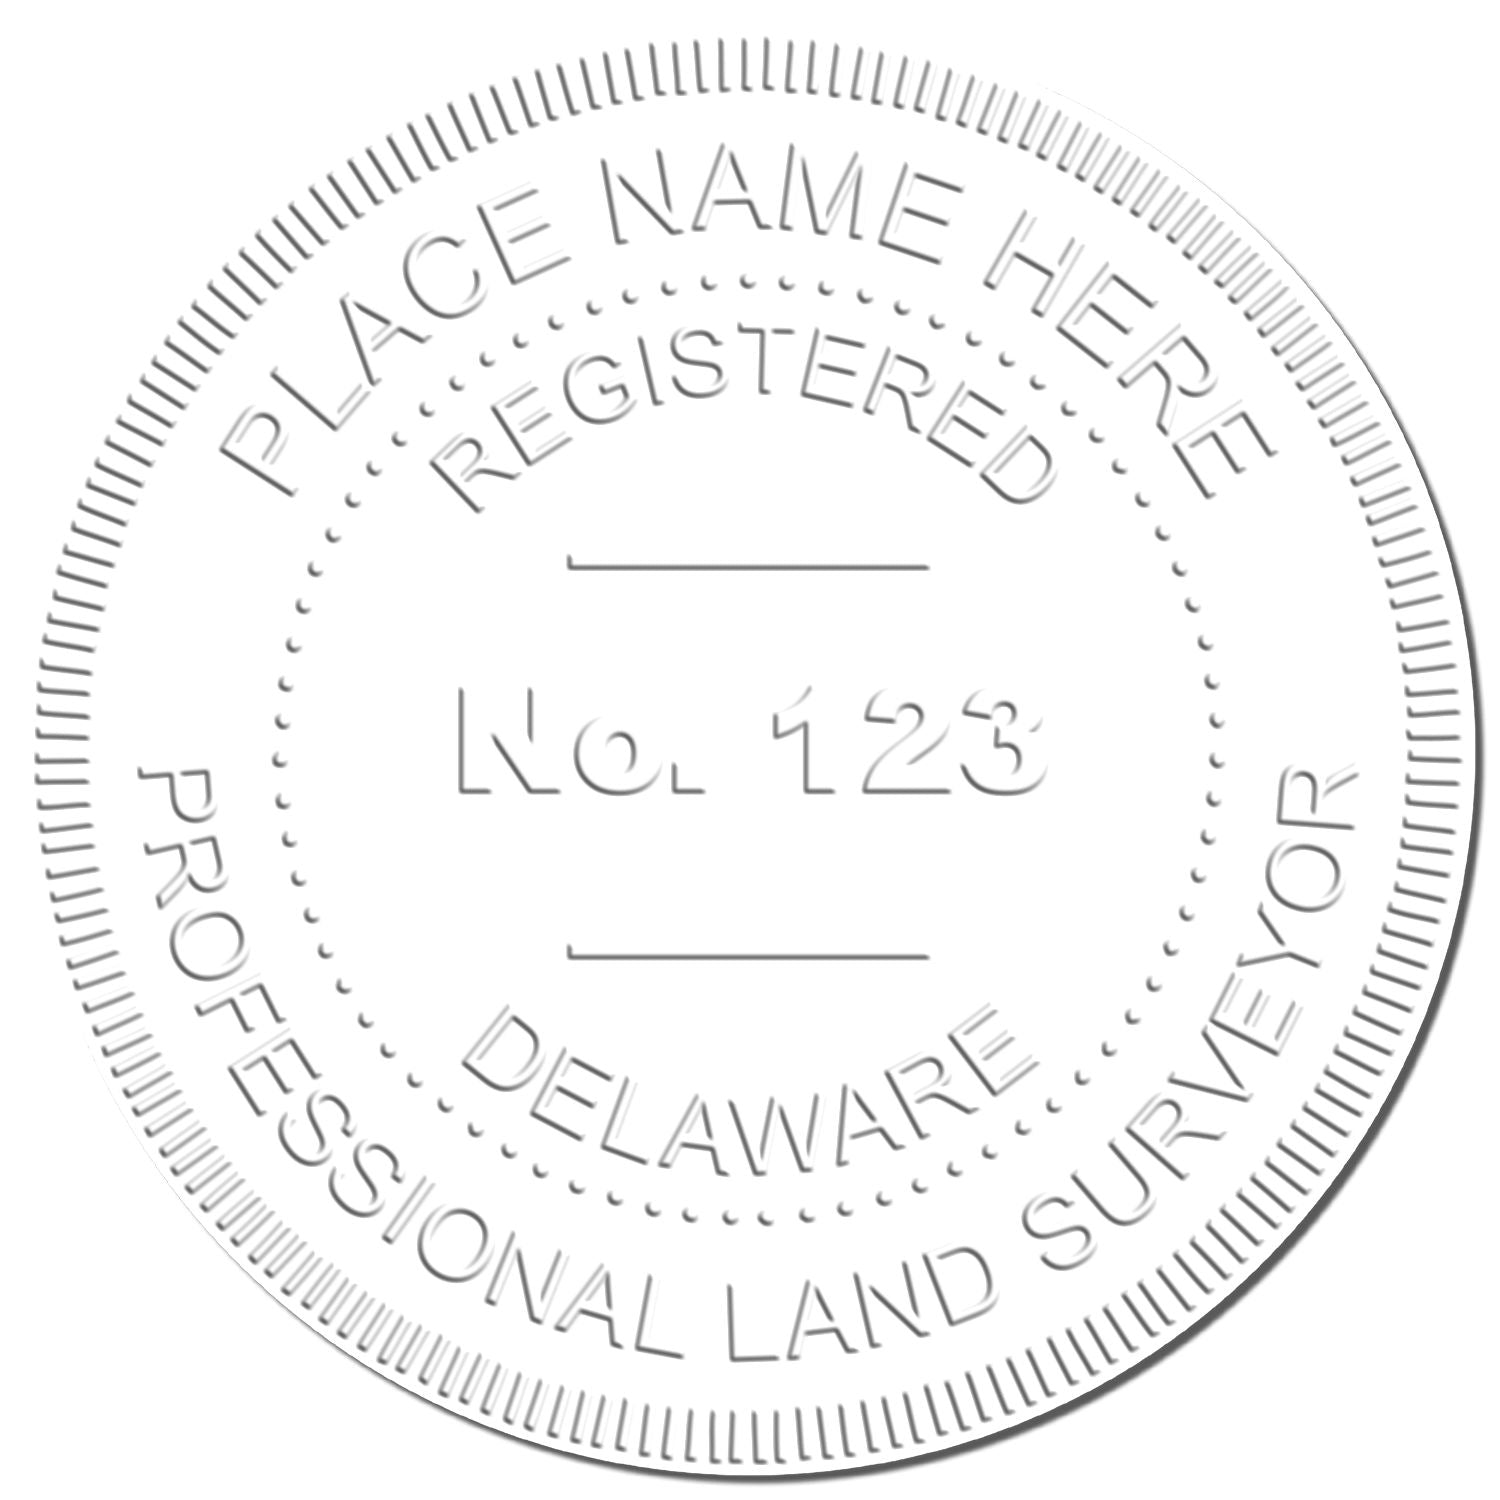 The main image for the Long Reach Delaware Land Surveyor Seal depicting a sample of the imprint and electronic files